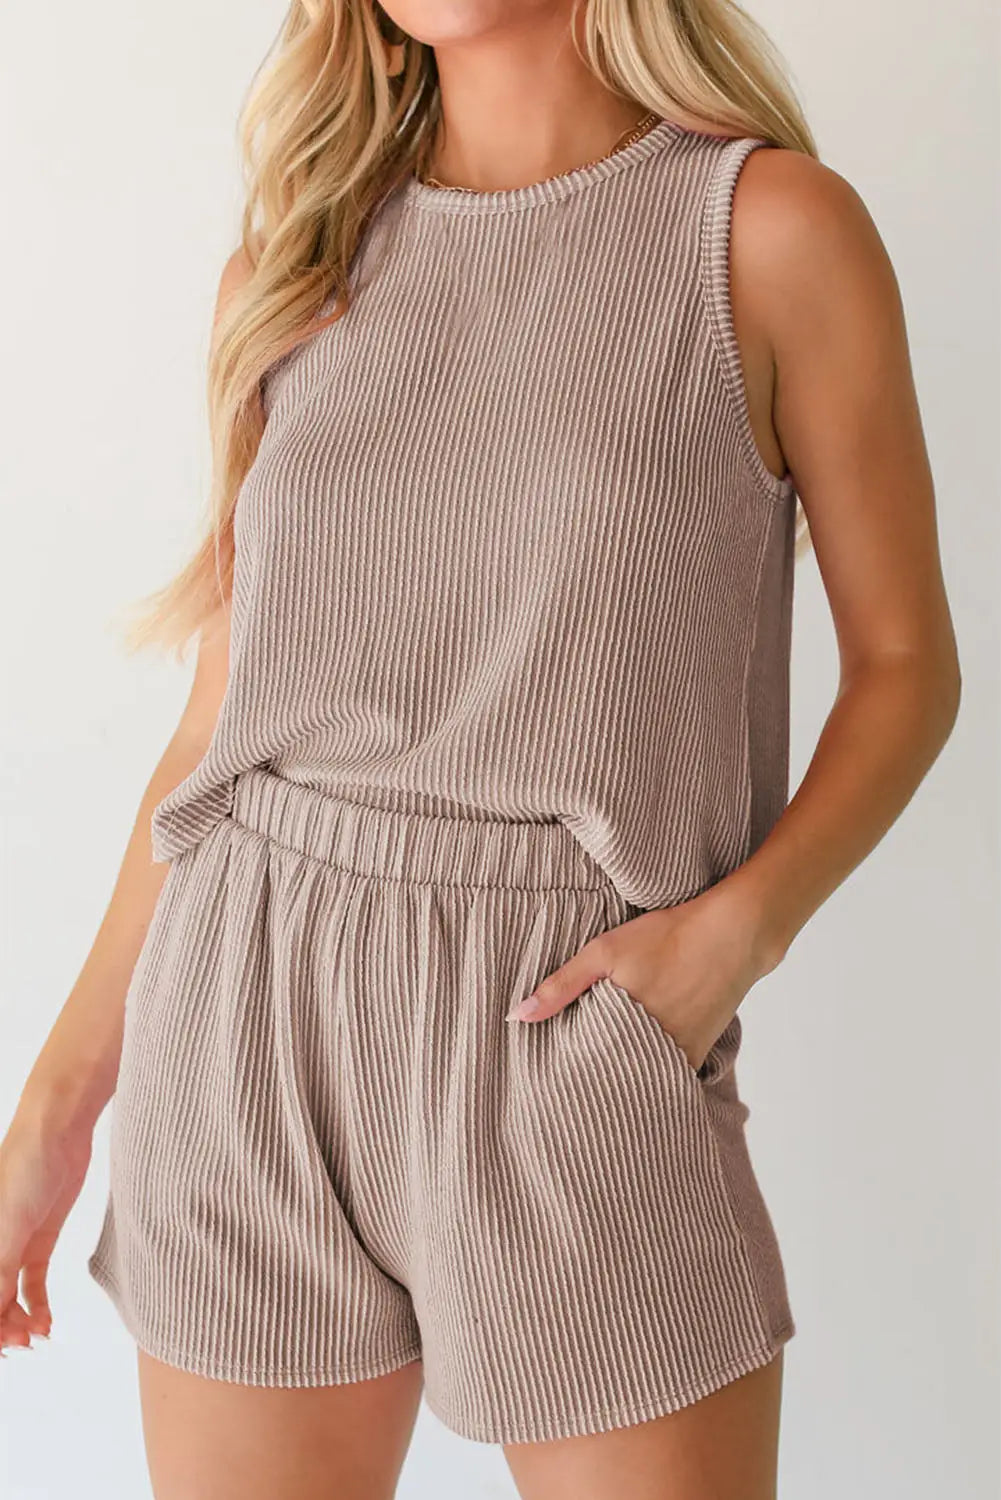 Corded tank top and shorts set - two piece sets